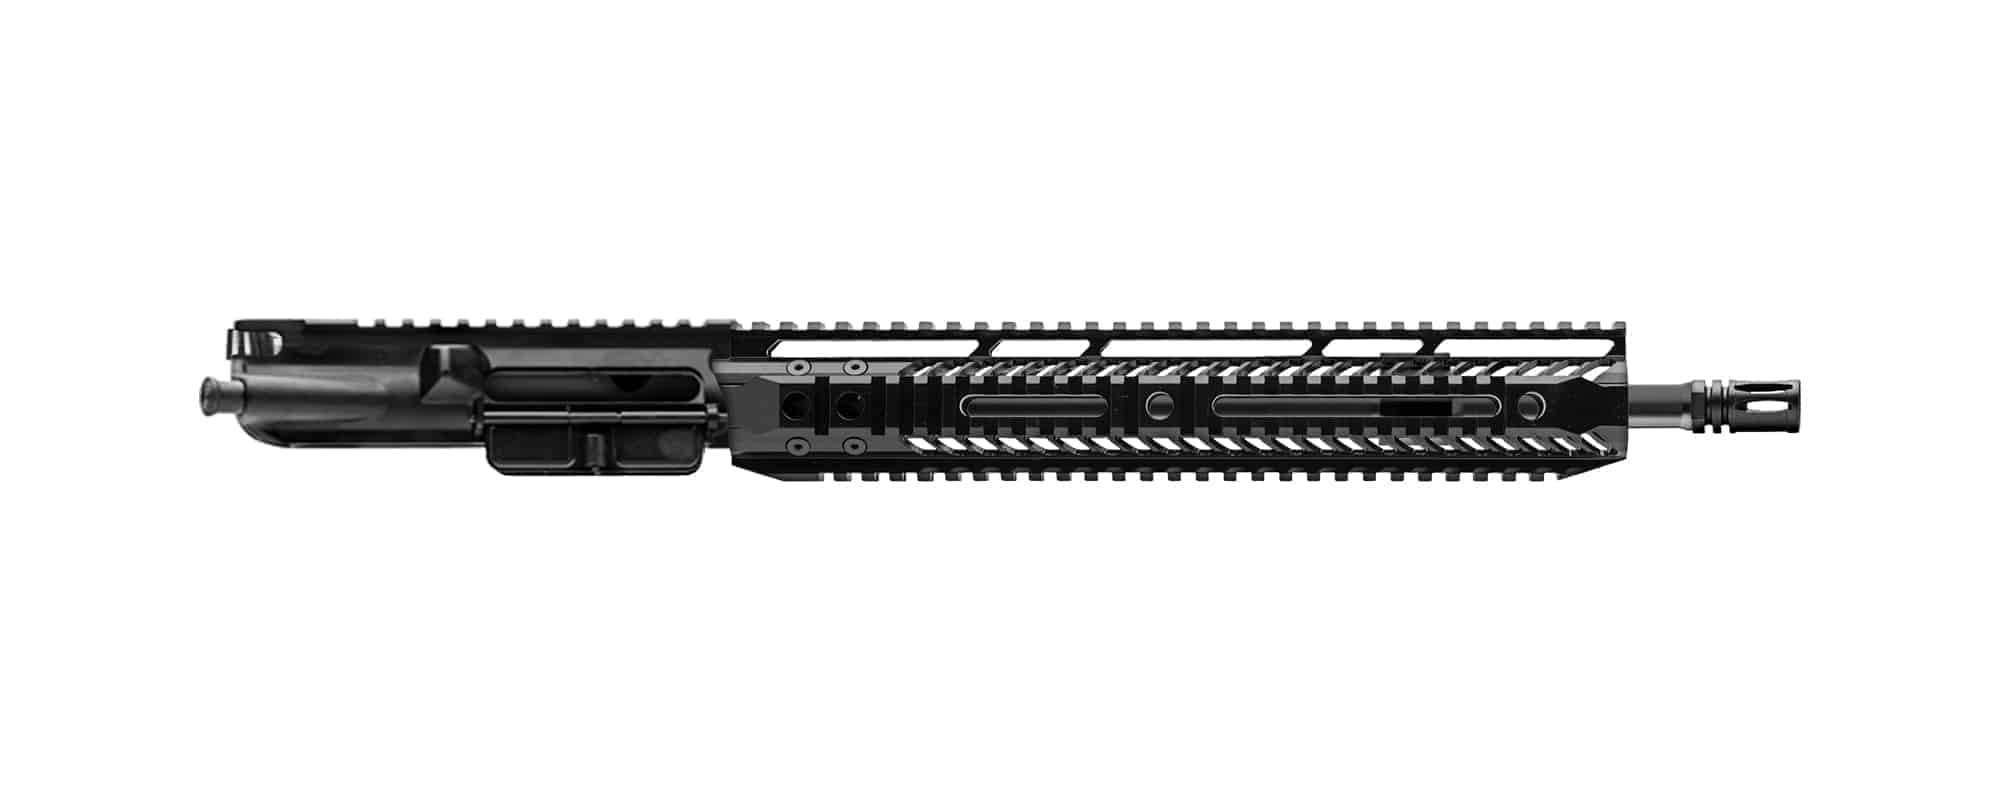 14.5" Upper With GPR 12